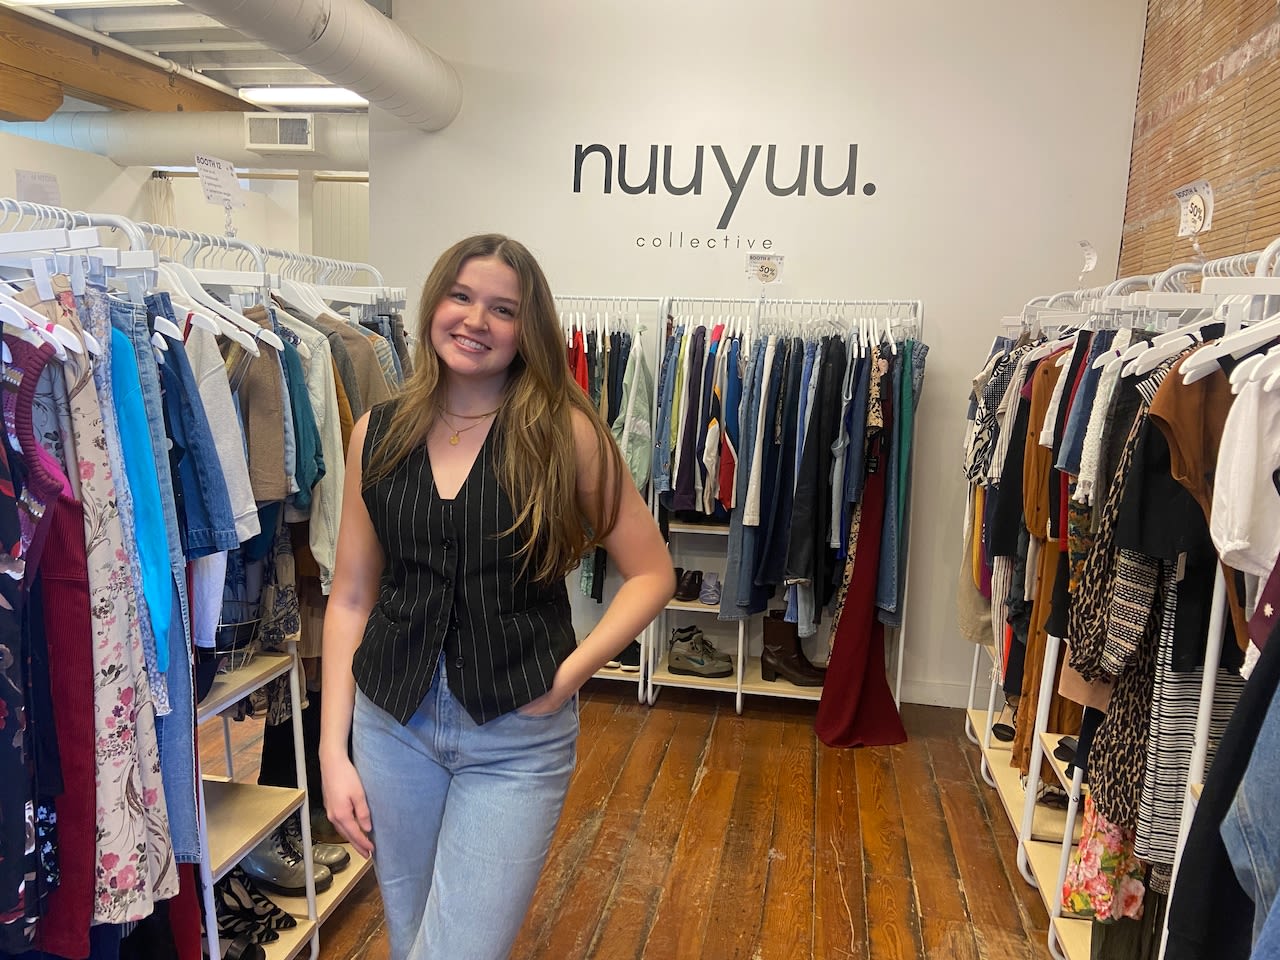 21-year-old, thrifting since middle school, opens consignment store in Kerrytown